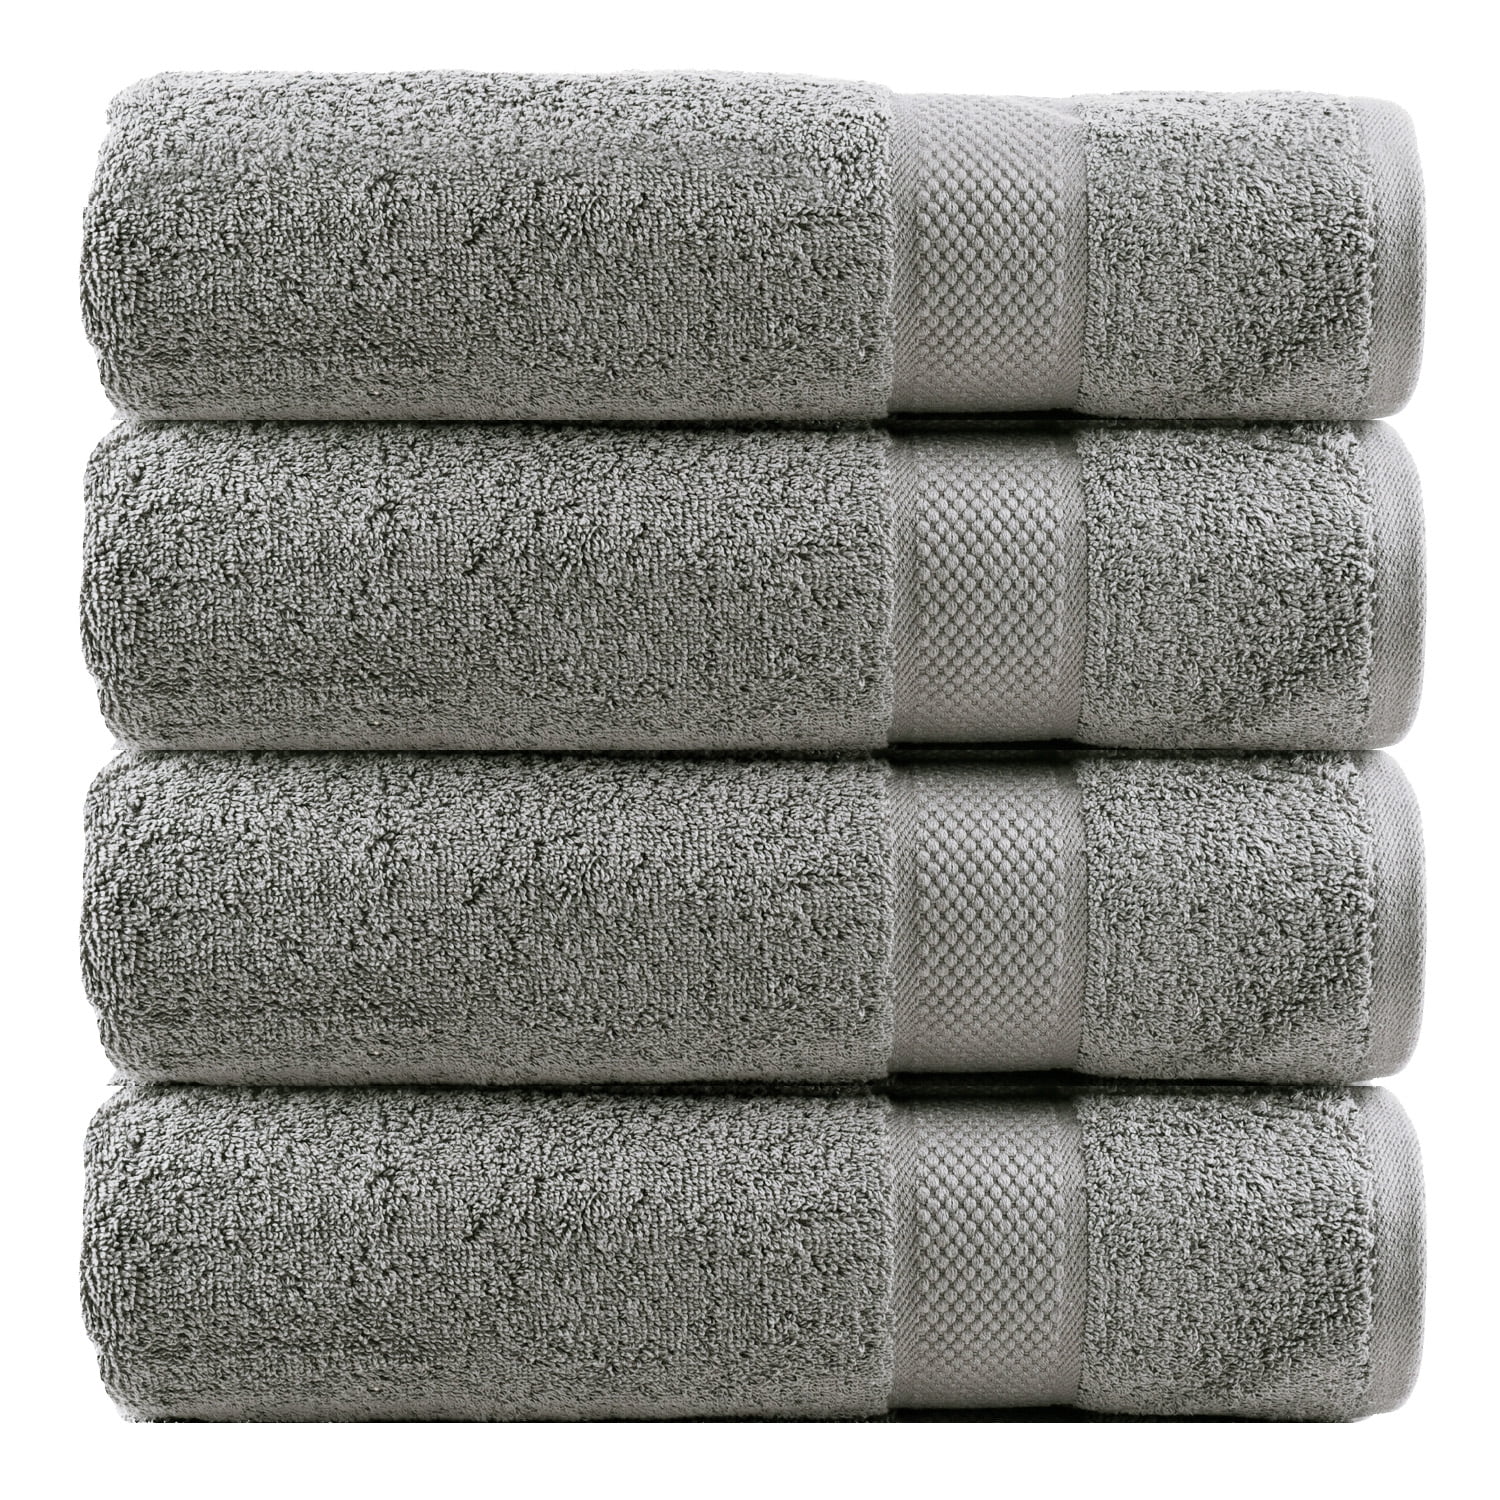 Oakias Silver Bath Towels 4 Pack 27 x 54 Inches Highly Absorbent, 600 GSM  Fluffy & Soft Luxury Bath Sheets Silver Bath Towels Set of 4